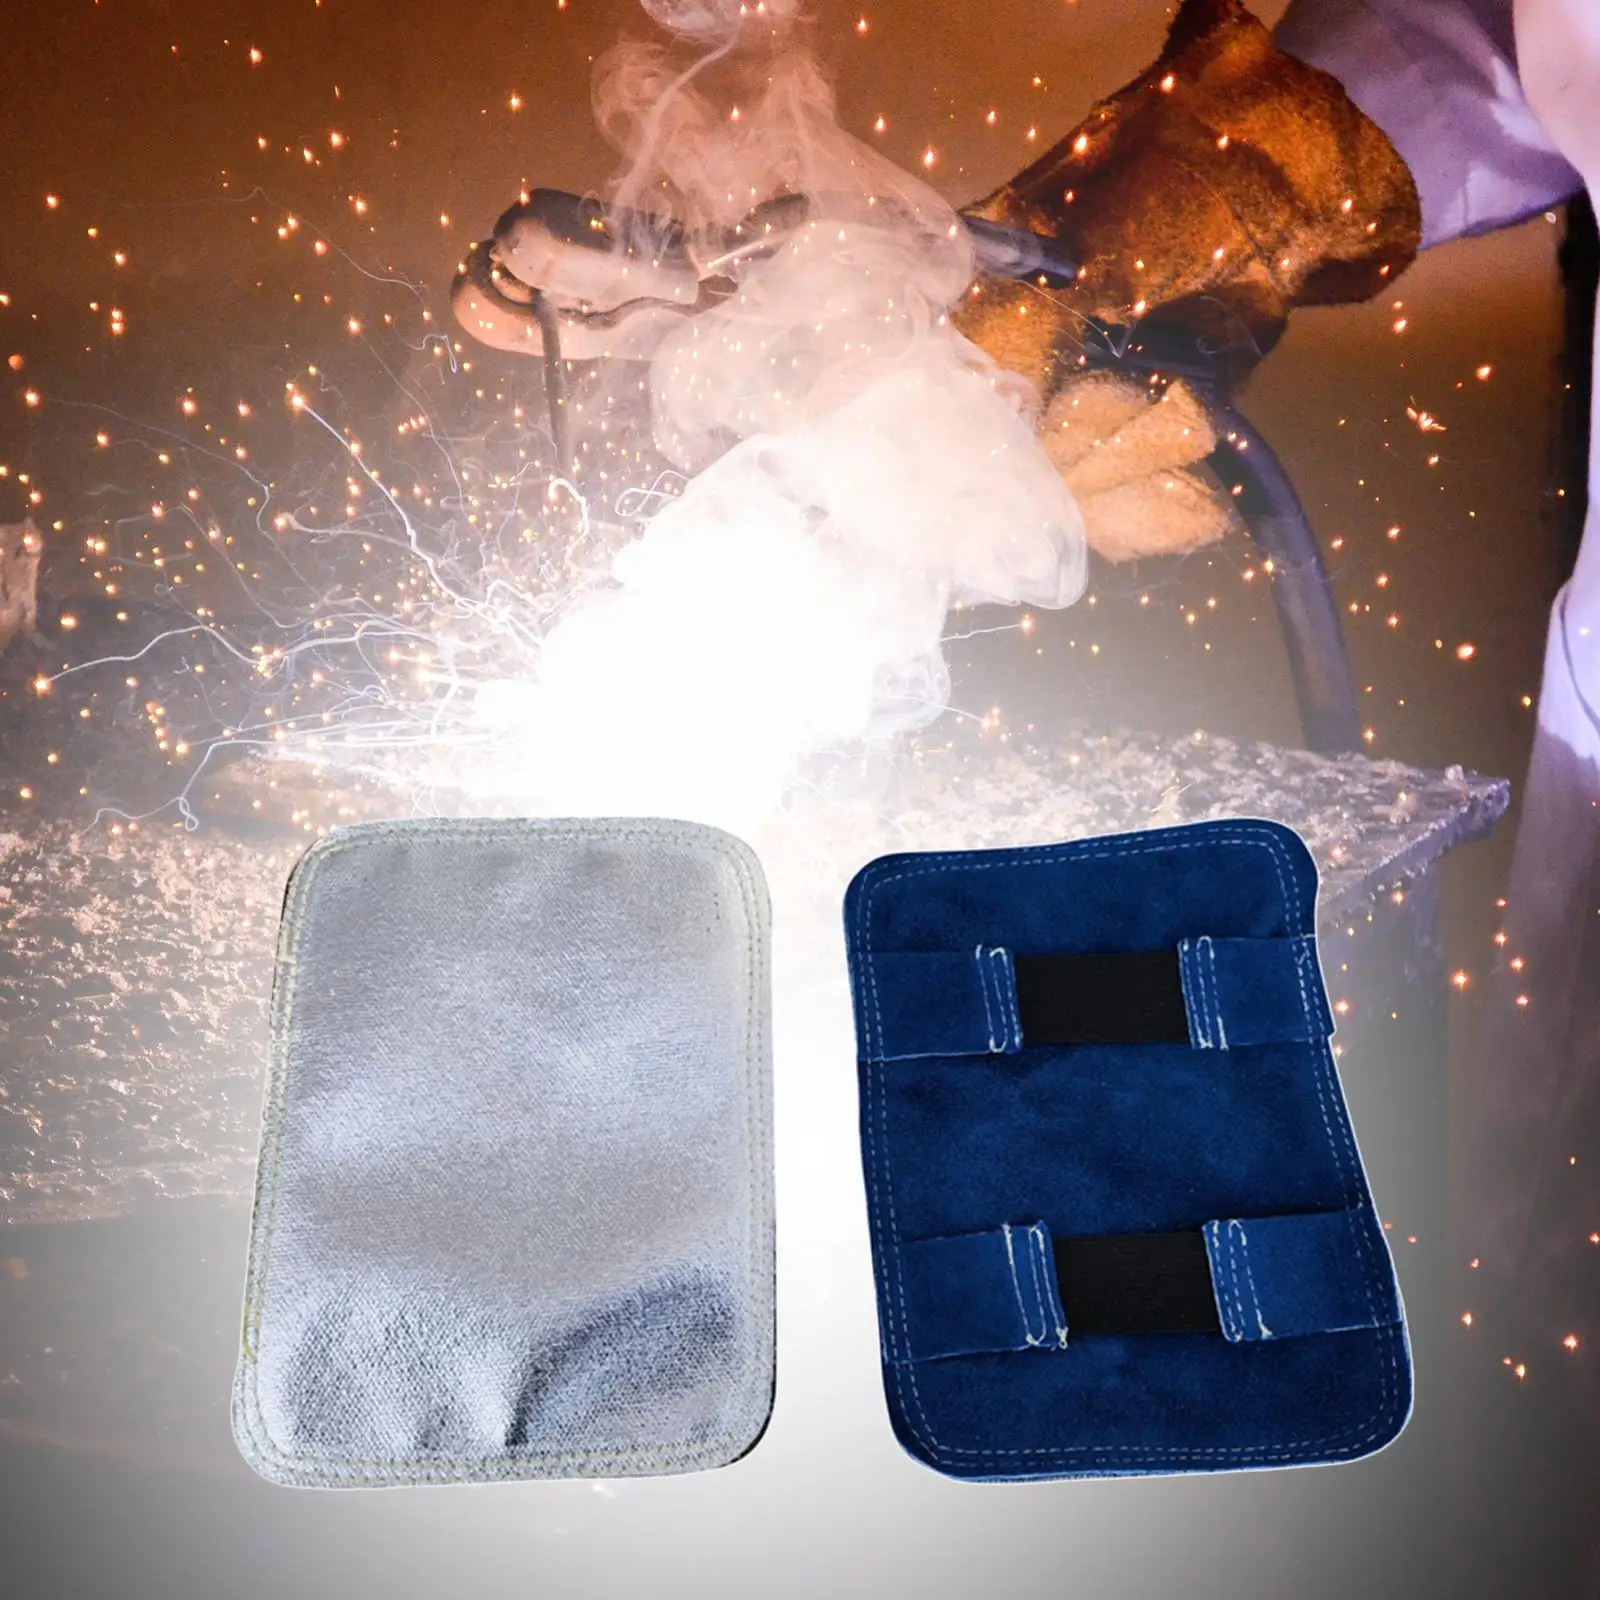 Fireproof Gloves Pad High Temperature Resistant Welding Gloves Pad for Cutting Industrial Boiler Welding Metal Smelting Camping